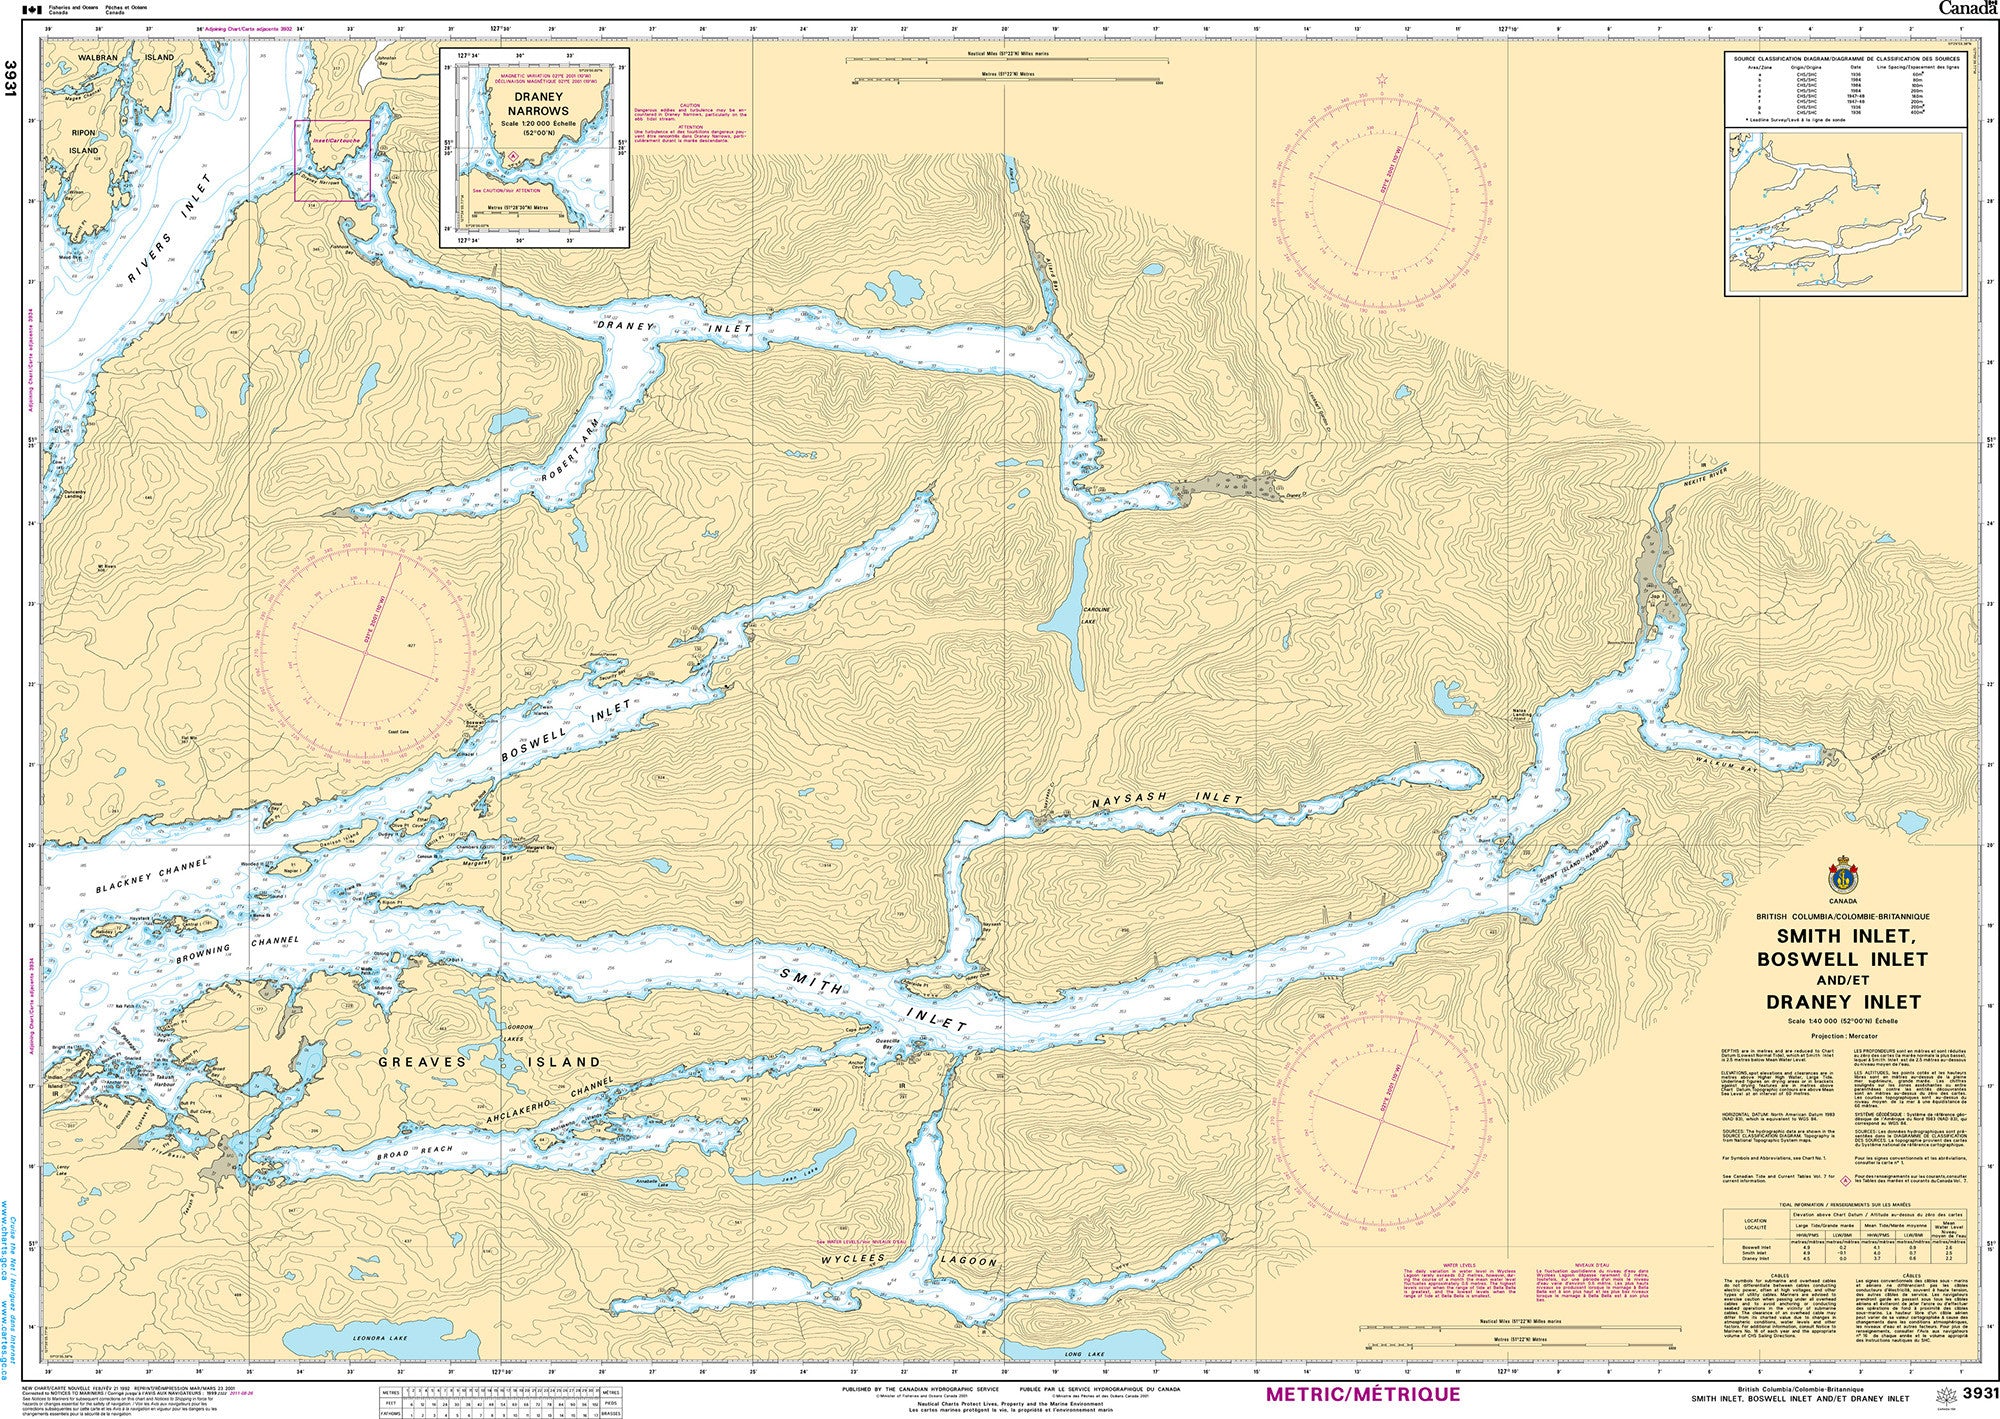 Canadian Hydrographic Service Nautical Chart CHS3931: Smith Inlet, Boswell Inlet and/et Draney Inlet